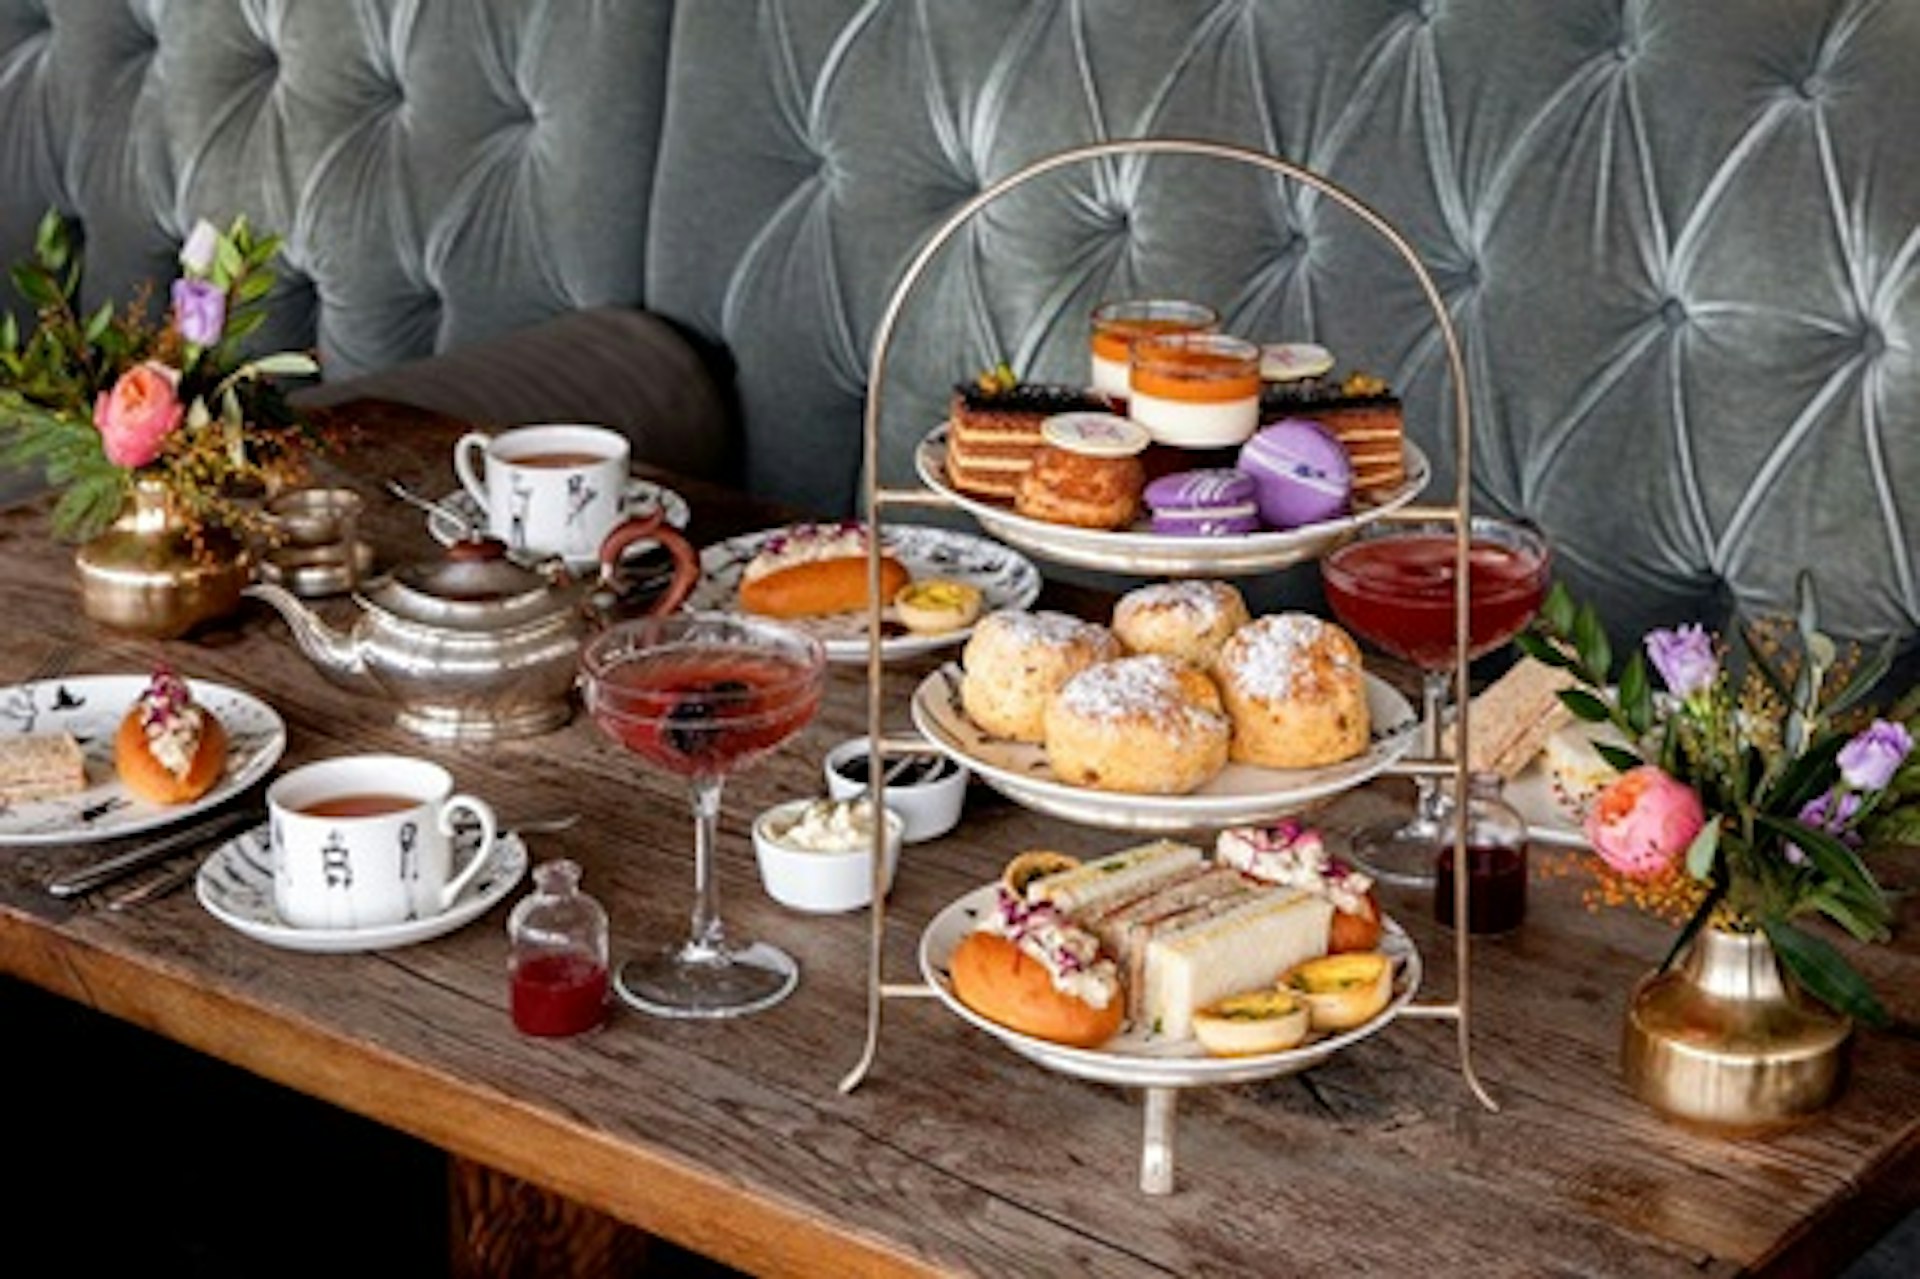 Theatrical Inspired Afternoon Tea for Two at The Swan at The Globe 2